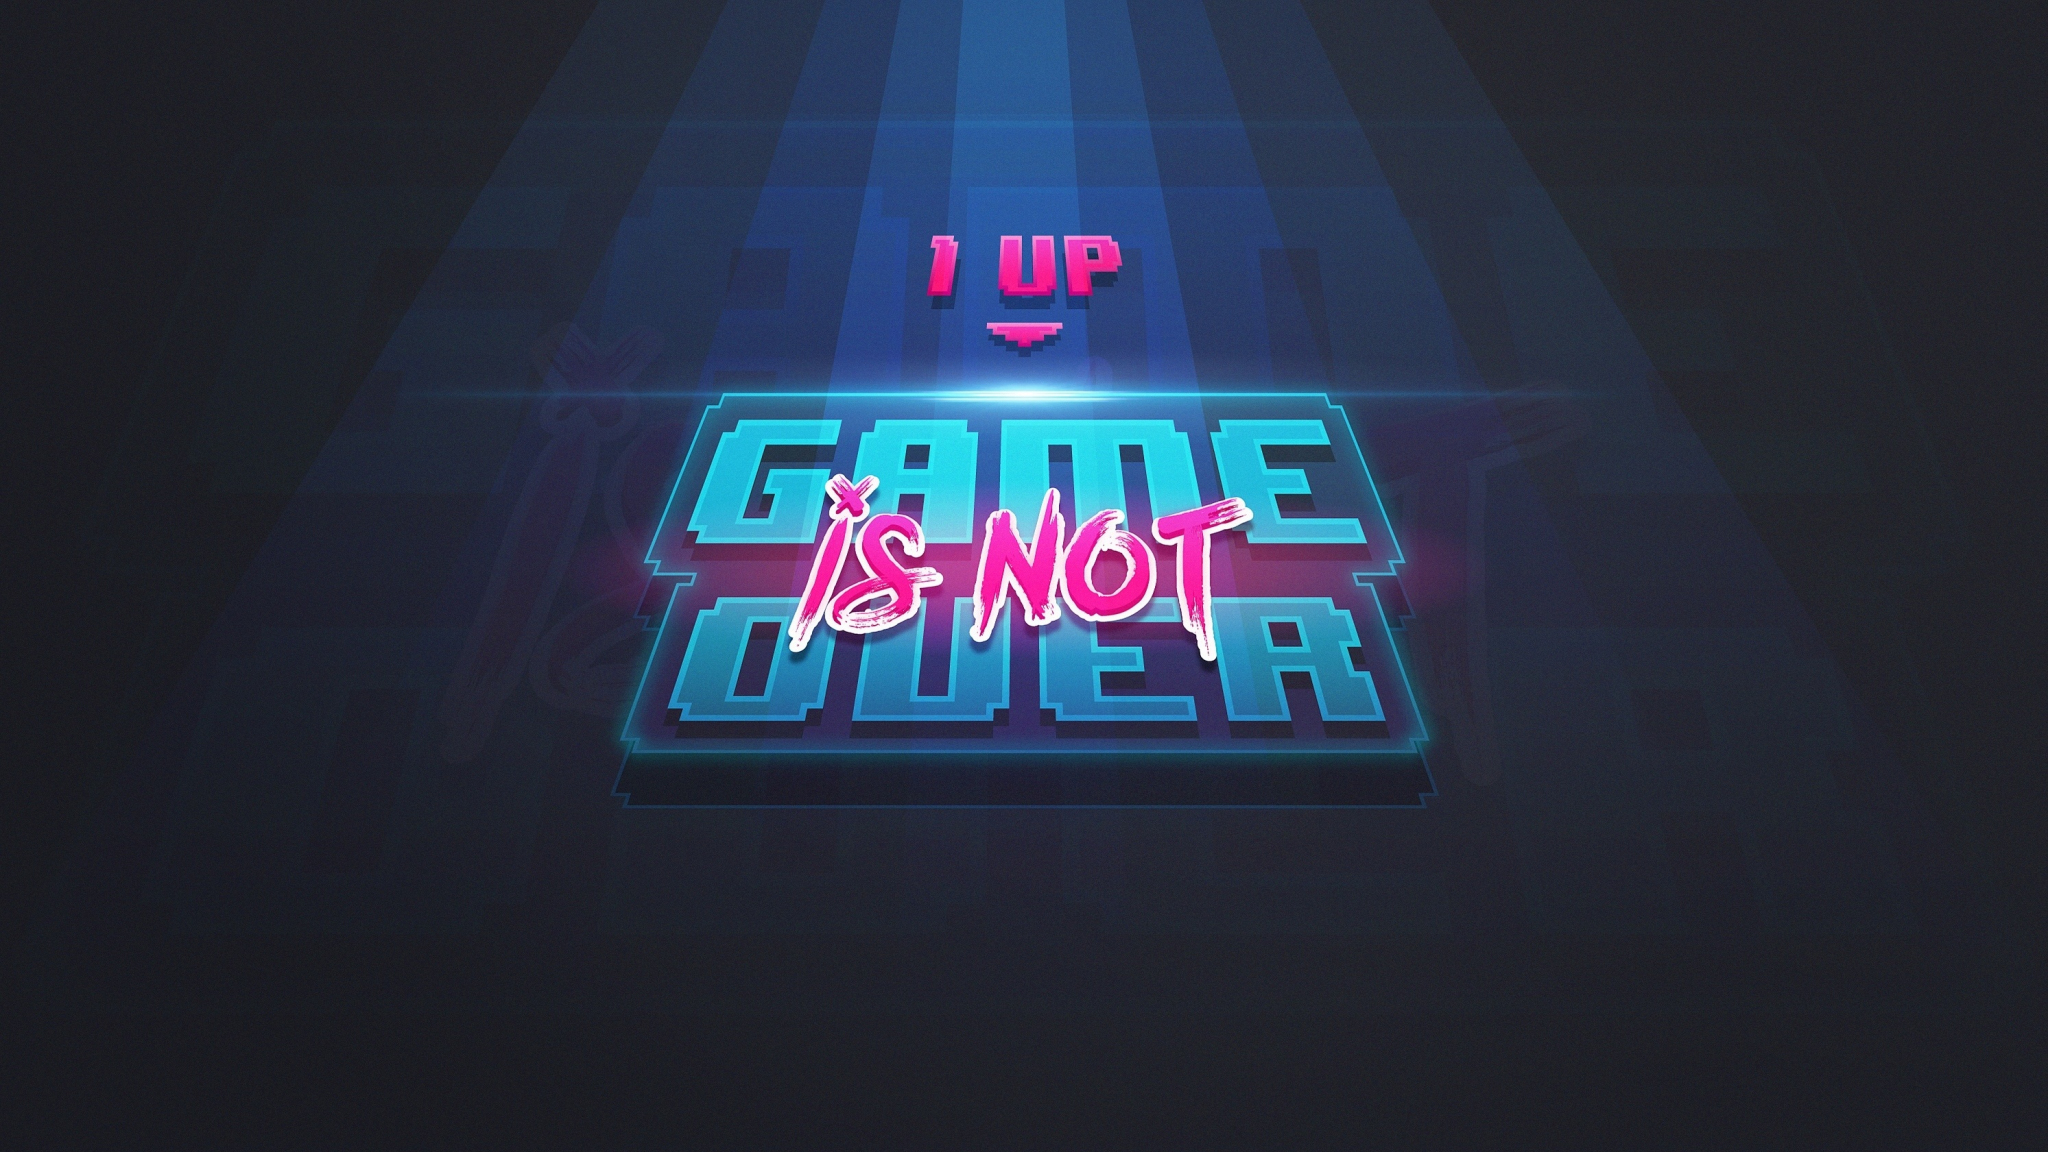 Download wallpaper x game over up art dual wide x hd background